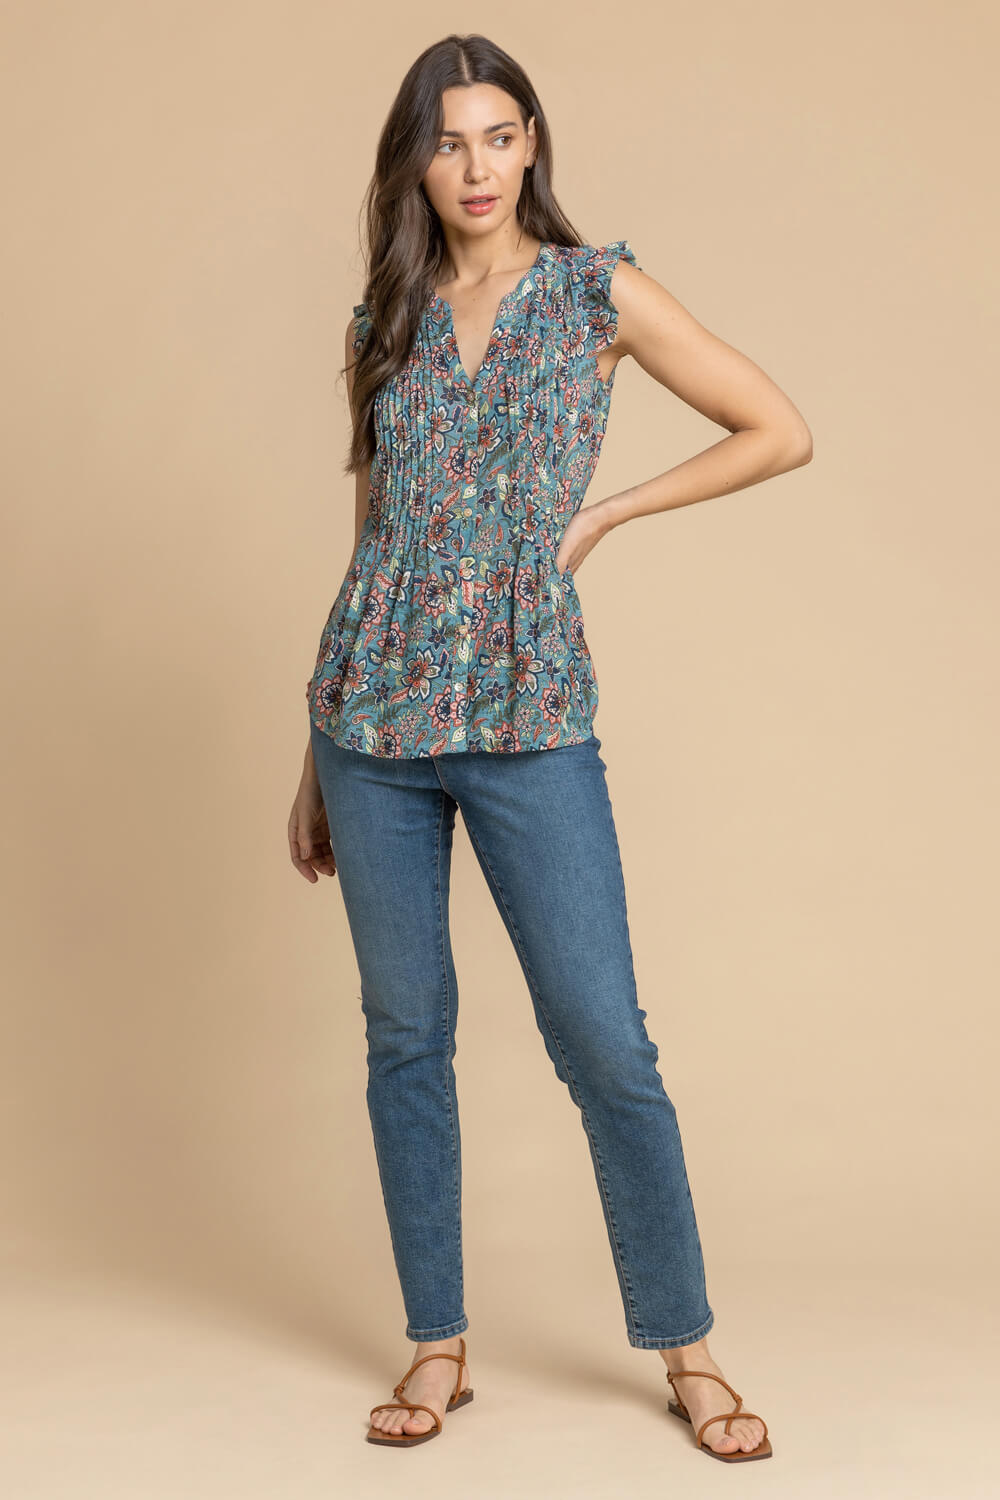 Teal Sleeveless Frill Detail Floral Blouse, Image 3 of 4